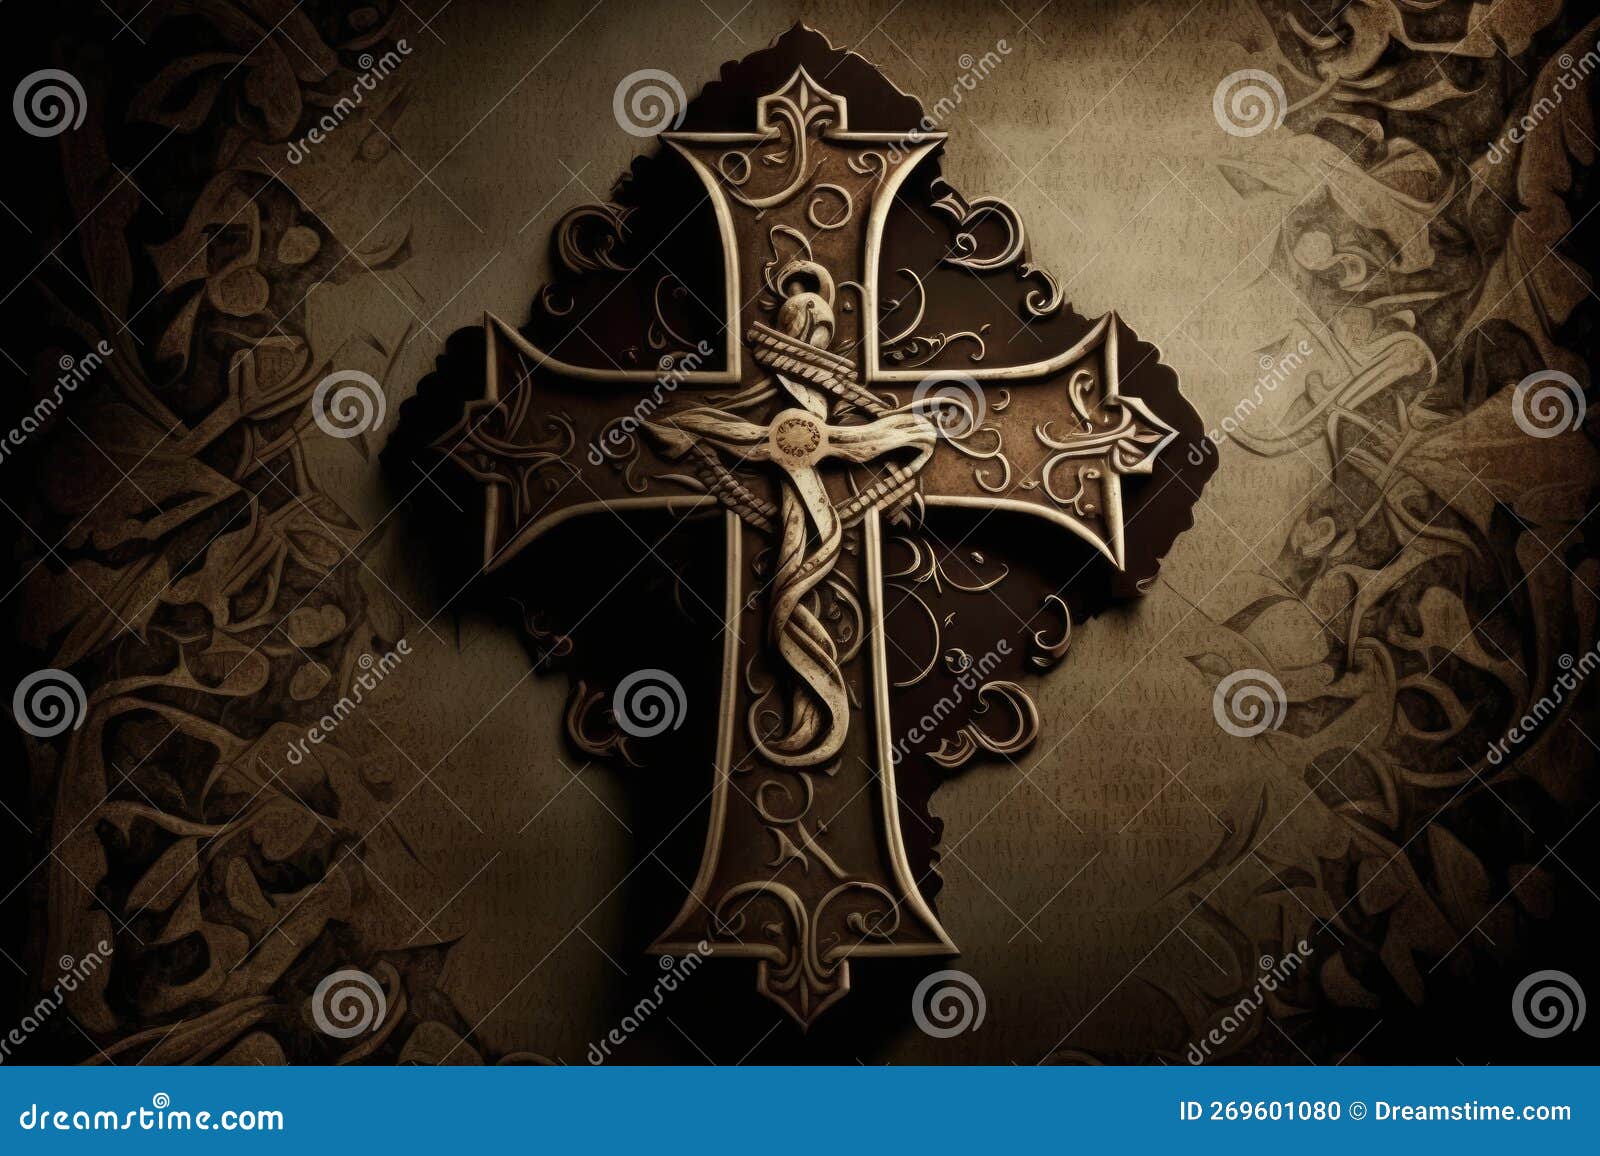 Jesus Cross Praying Holy Friday Background Wallpaper Image For Free  Download - Pngtree